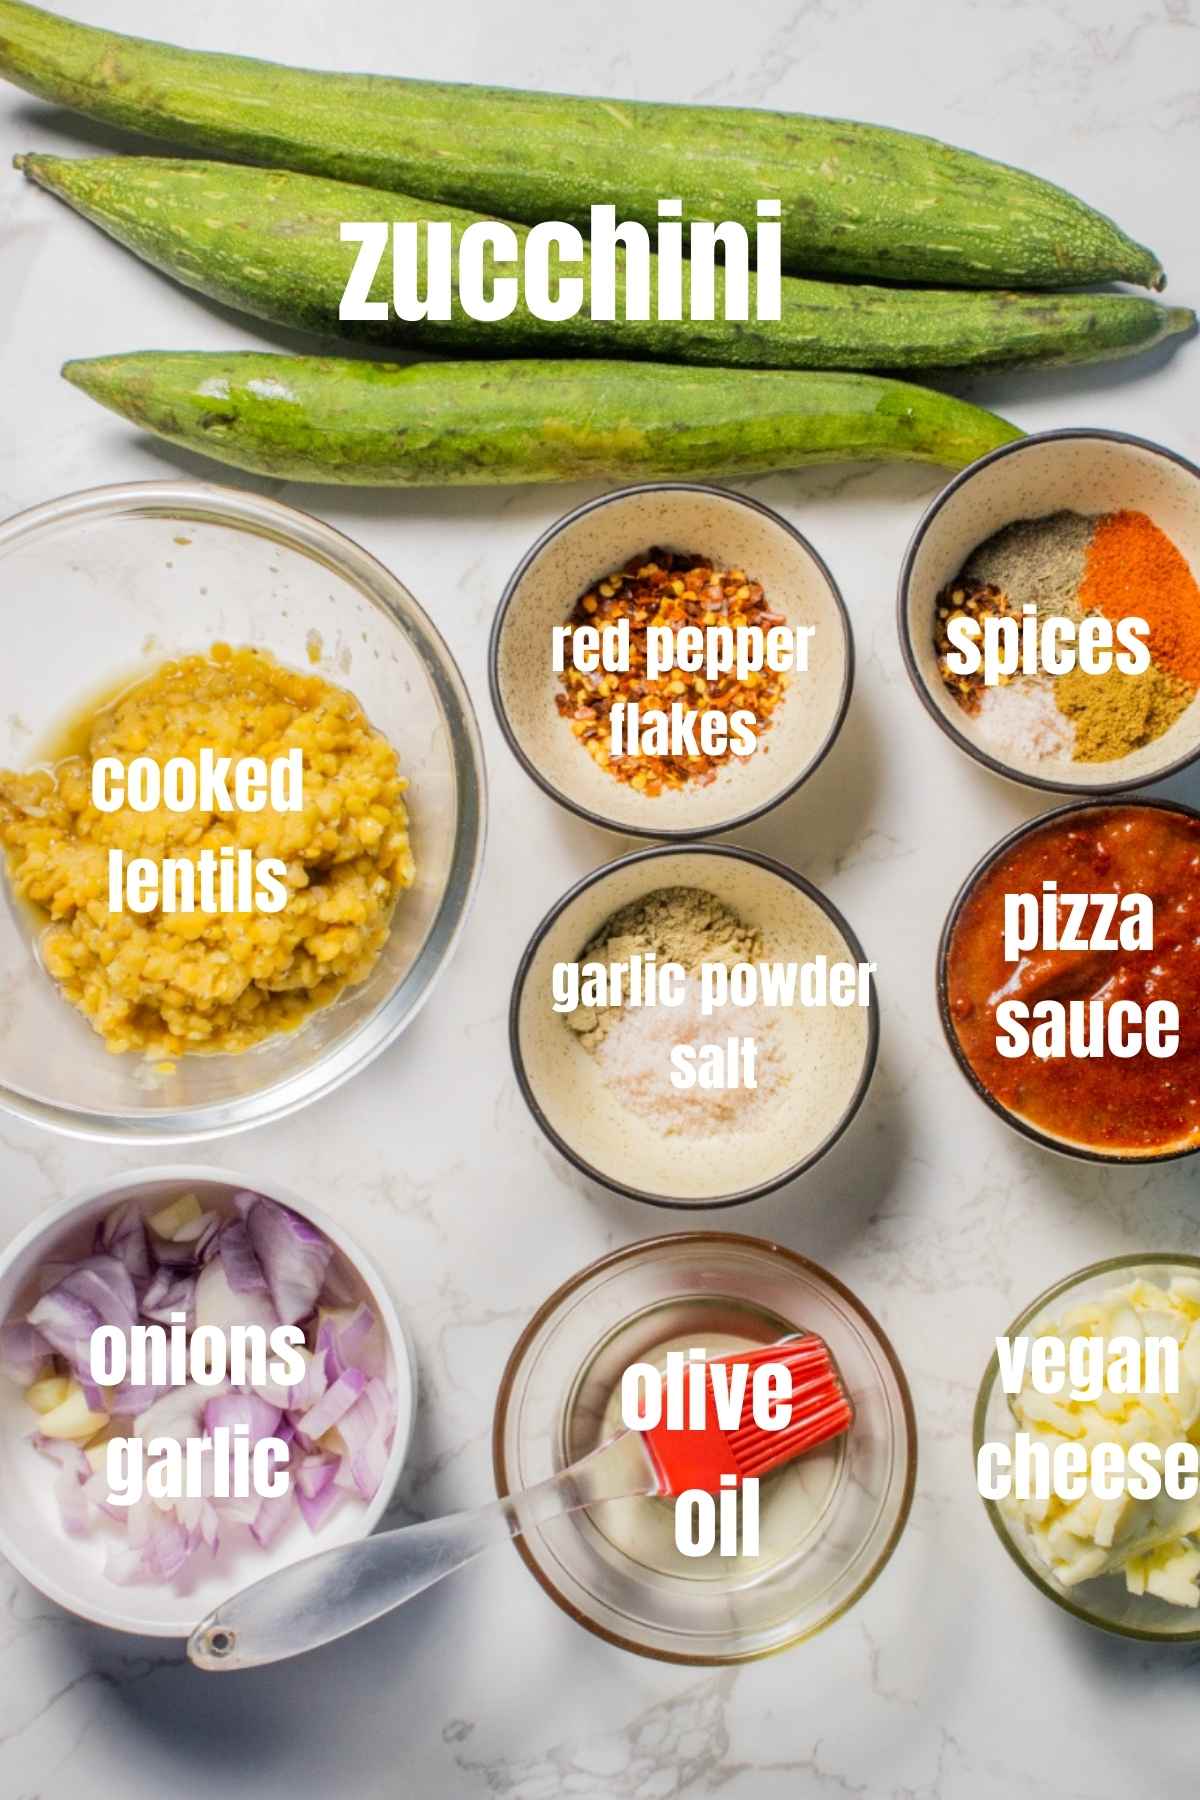 ingredients for lentil stuffed zucchini boats on table